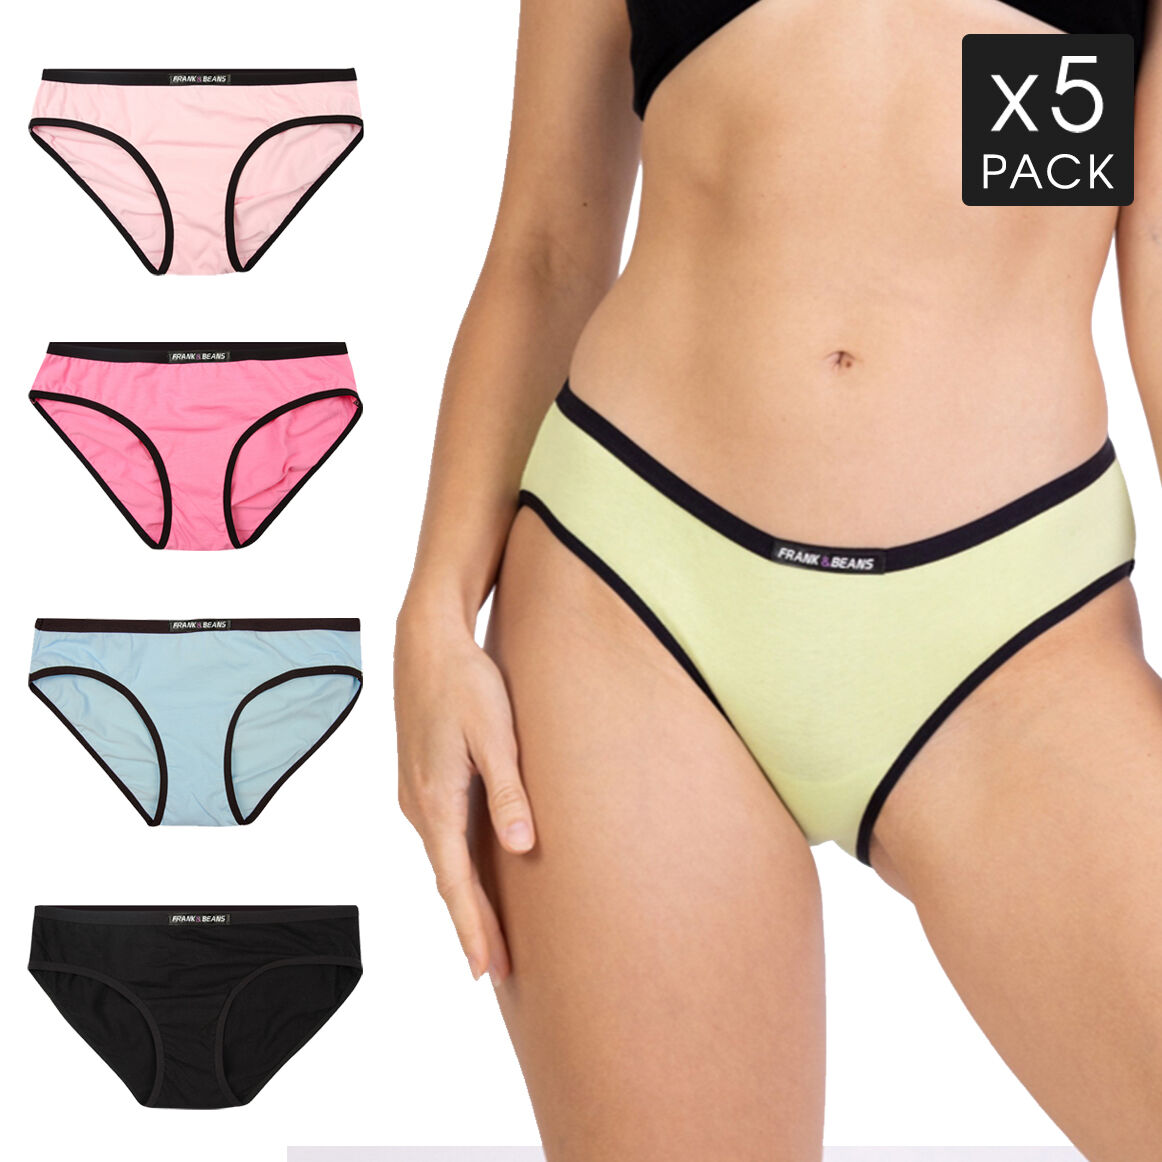 4X PACK LADIES Underwear Mixed Styles - Frank and Beans Womens A20 $39.56 -  PicClick AU